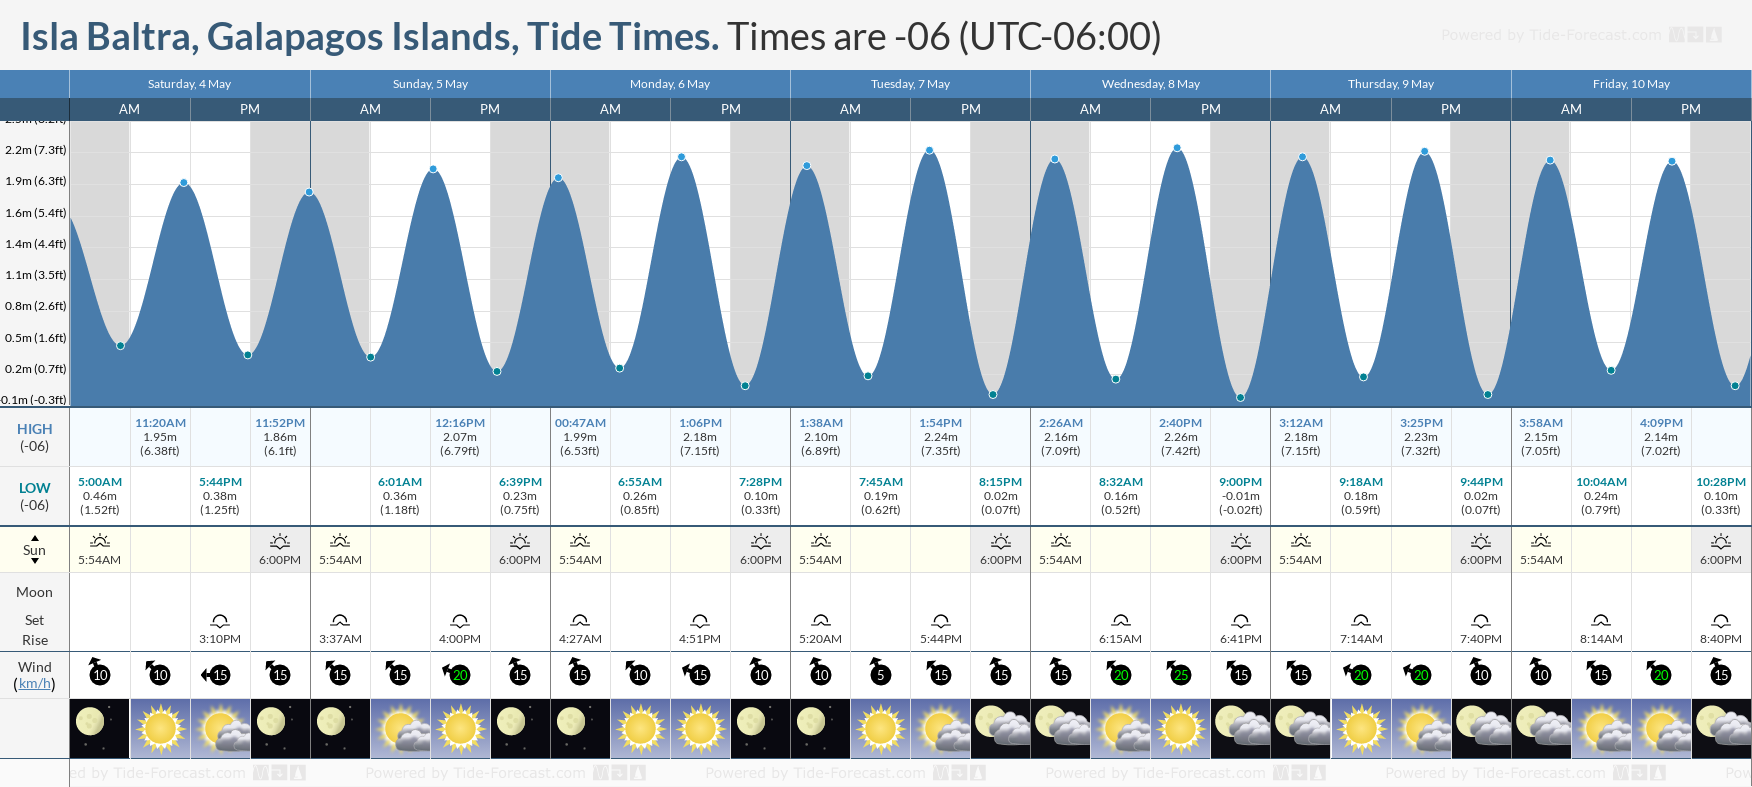 Isla Baltra, Galapagos Islands Tide Chart including high and low tide times for the next 7 days